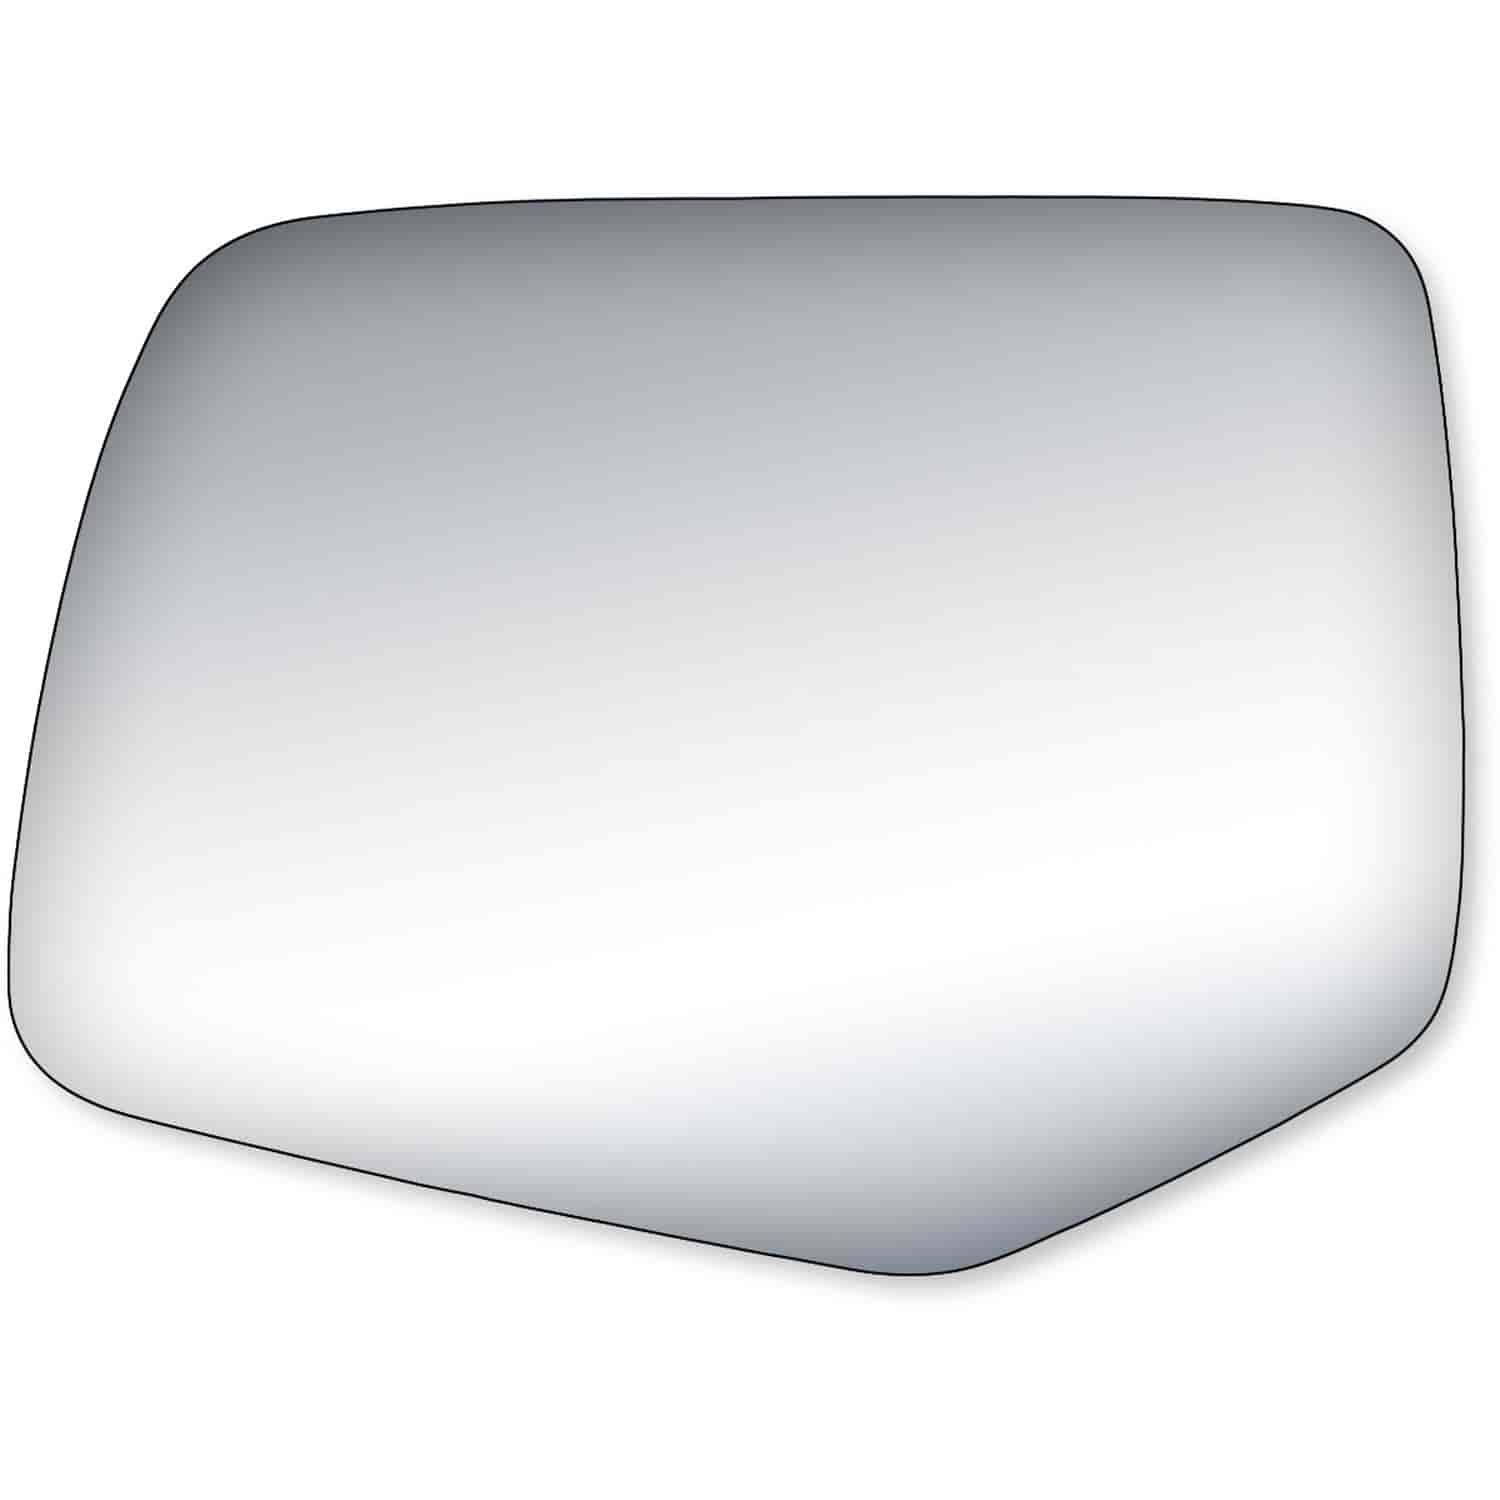 Replacement Glass for 08-12 Escape/ Hybrid w/out blind spot lens ; 08-11 Mariner/ Hybrid w/out blind